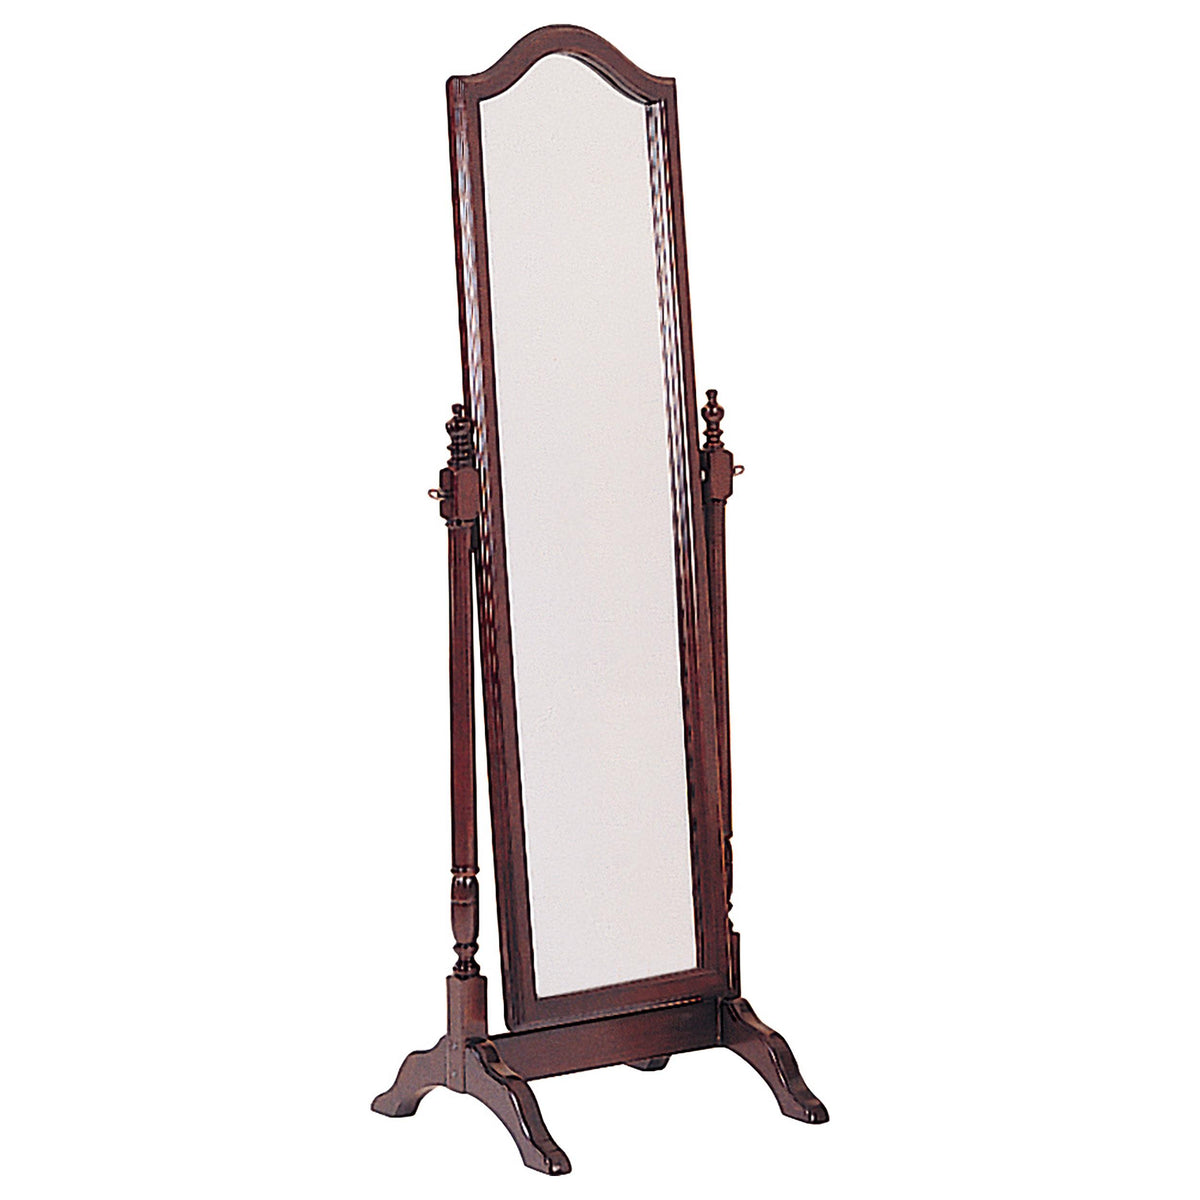 Cabot Rectangular Cheval Mirror with Arched Top Merlot Cabot Rectangular Cheval Mirror with Arched Top Merlot Half Price Furniture